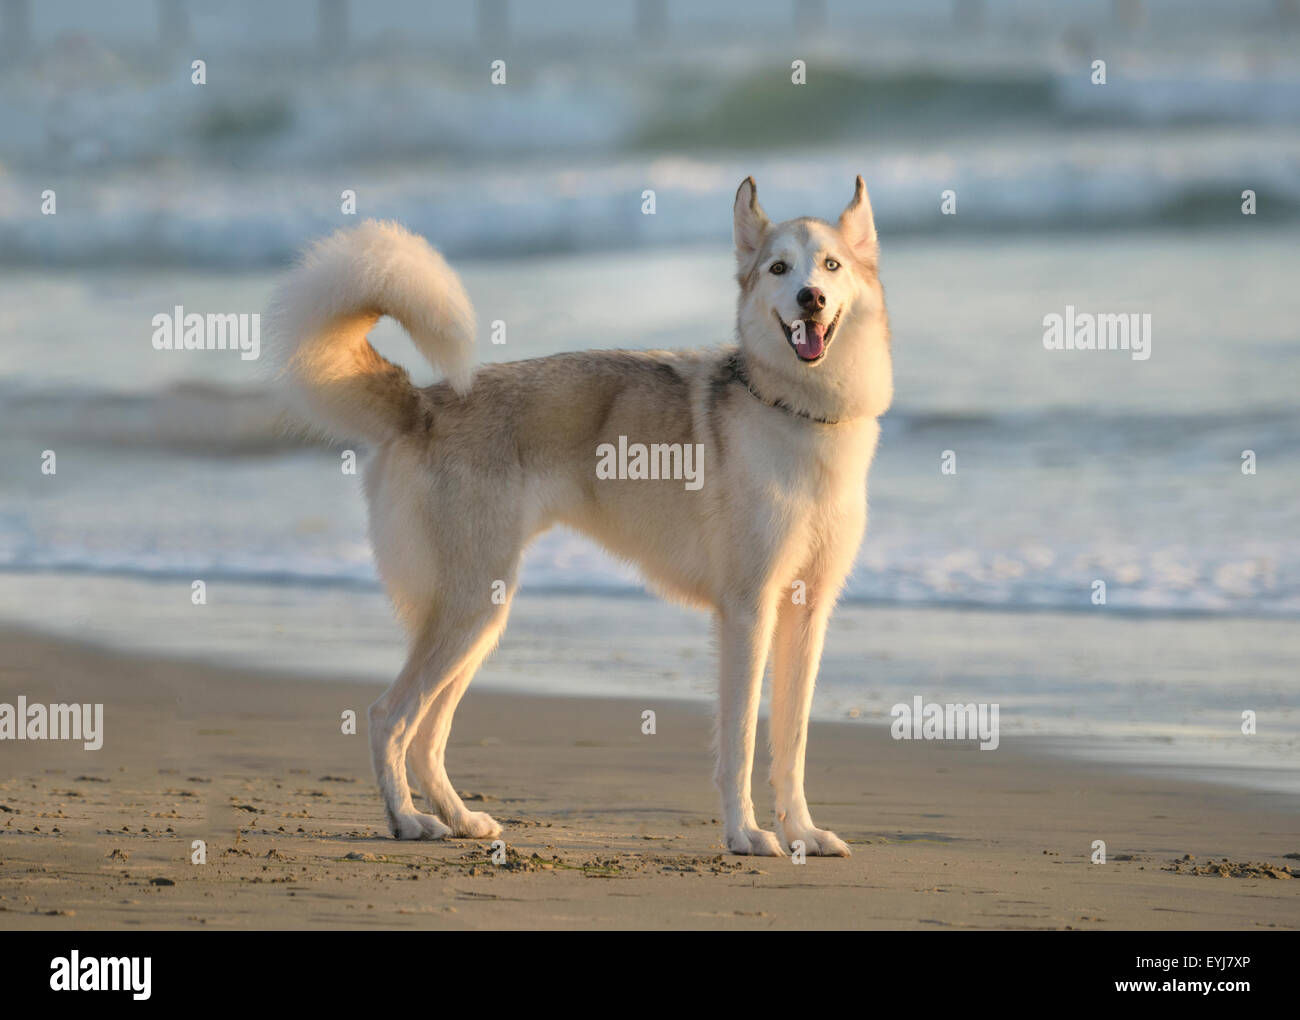 A happy Akita dog on beach with surf background Stock Photo